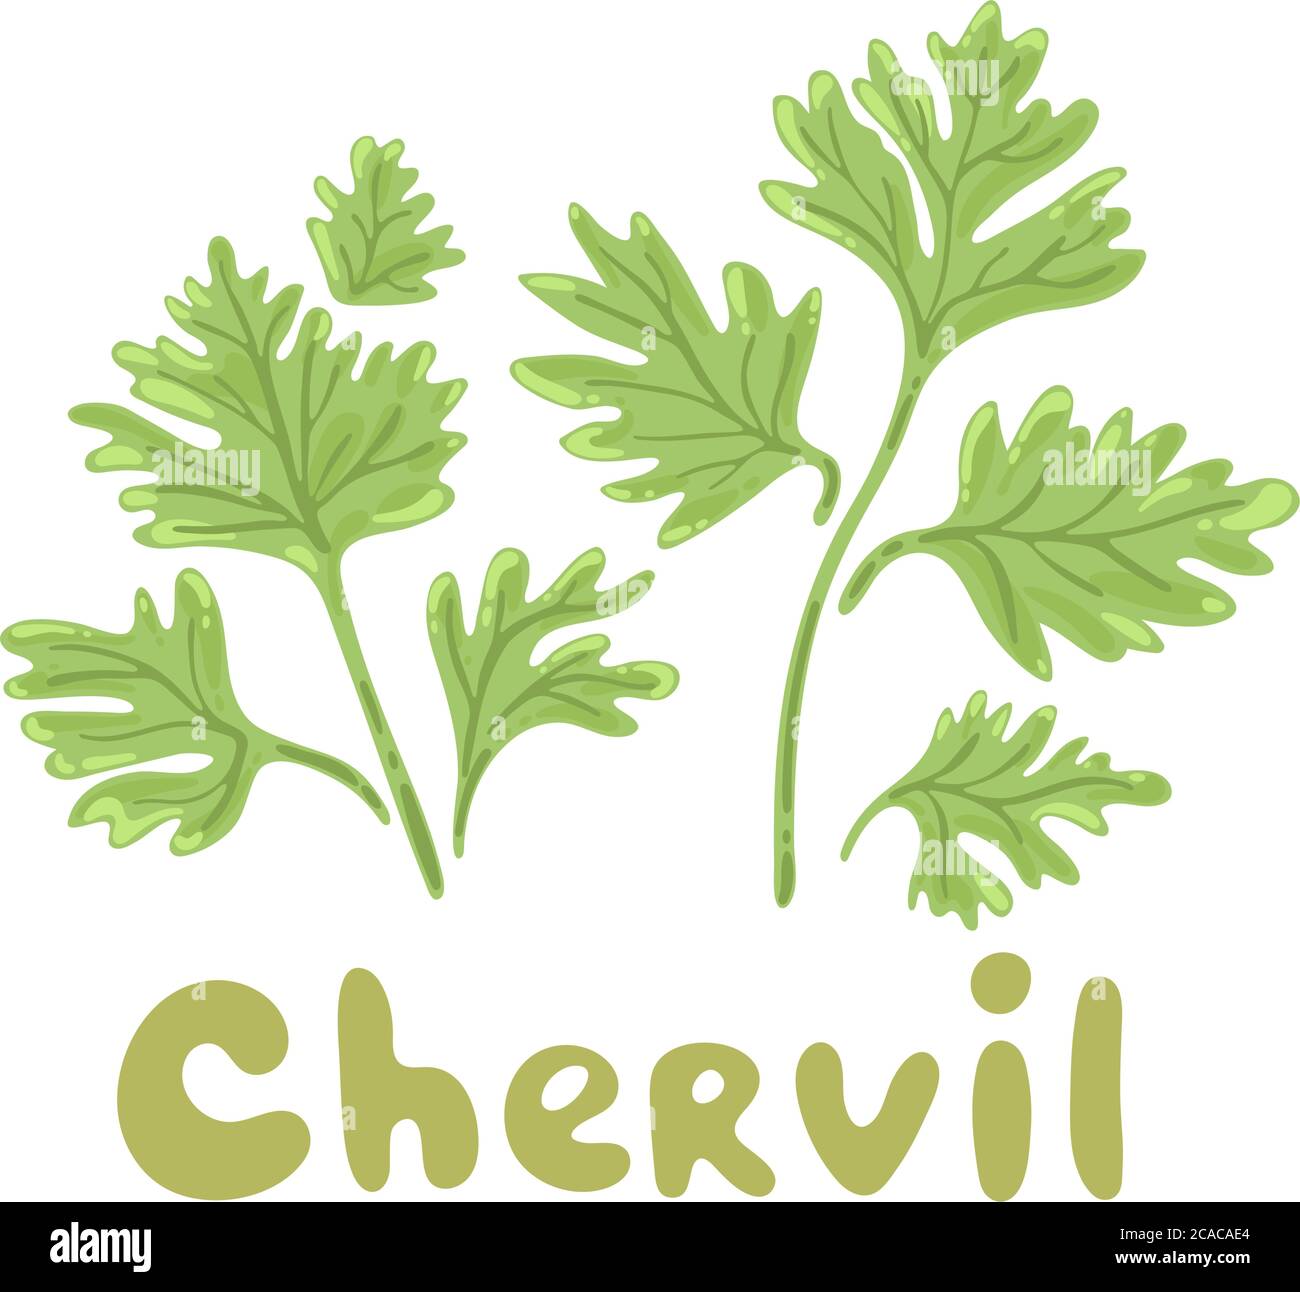 Chervil herb isolated on white background. Chervil branch with leaves. Herbal plants chervil or French parsley for seasoning in cooking. Stock Vector